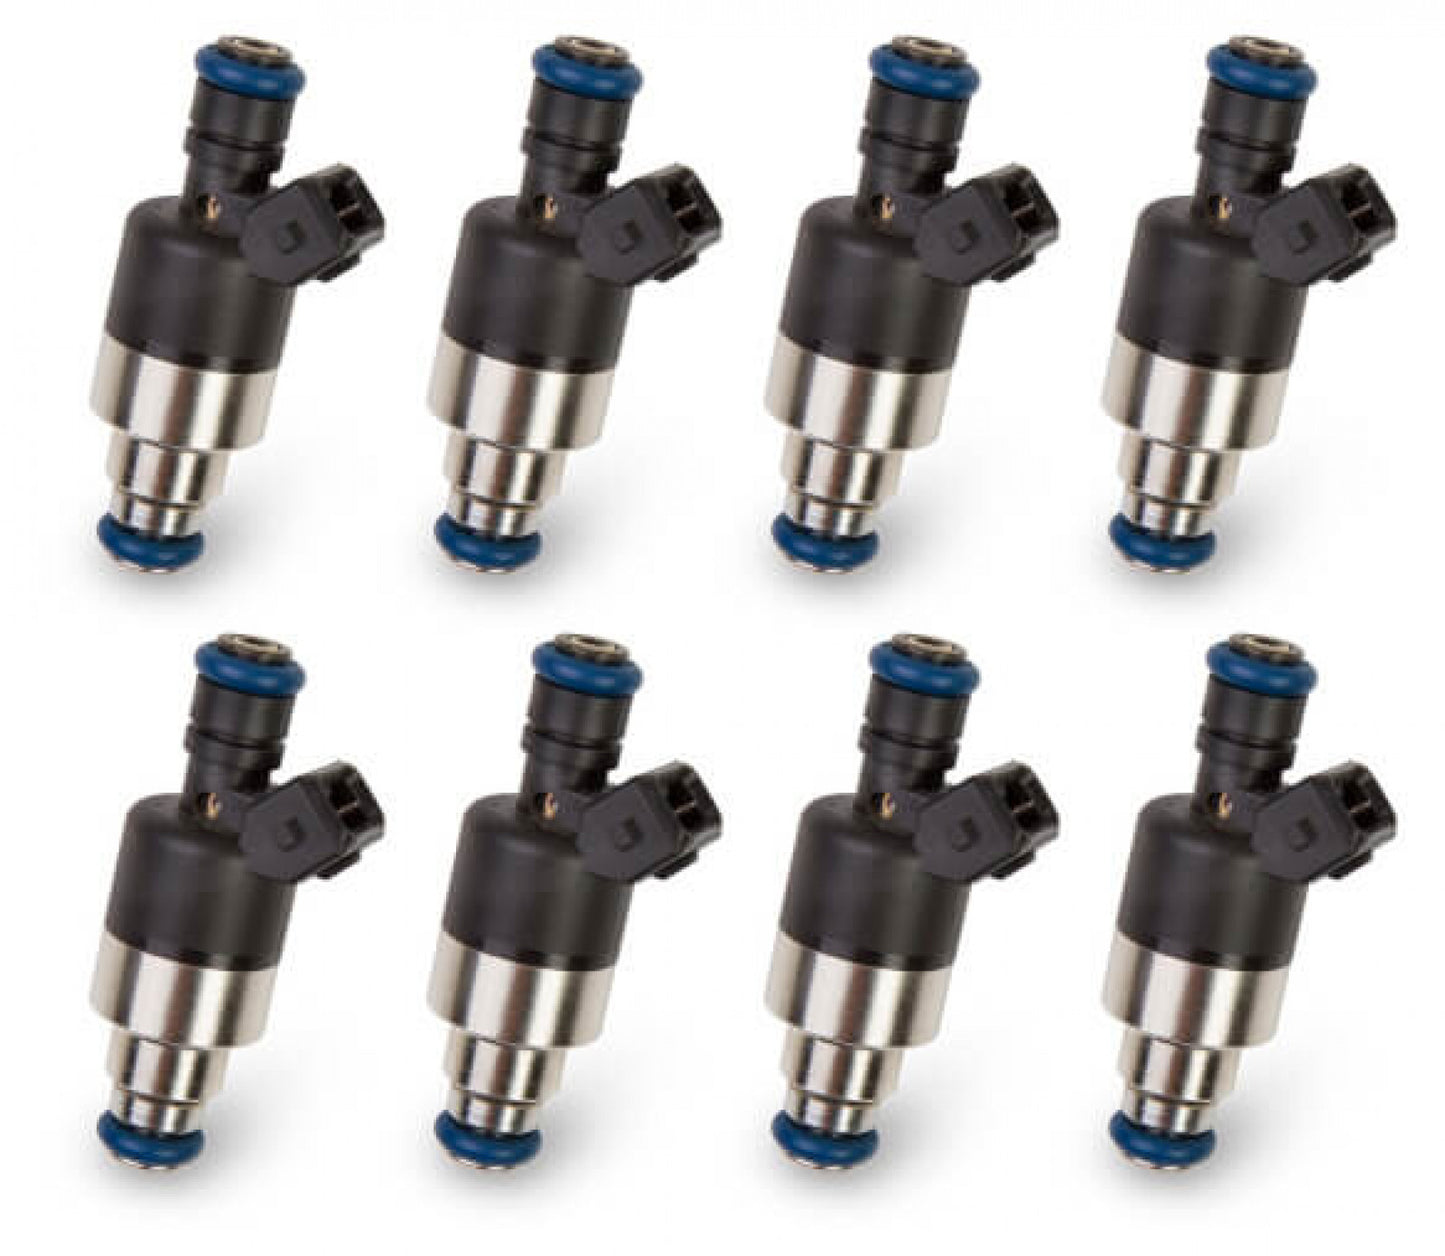 Holley EFI Performance Fuel Injectors - Set of Eight 522-248